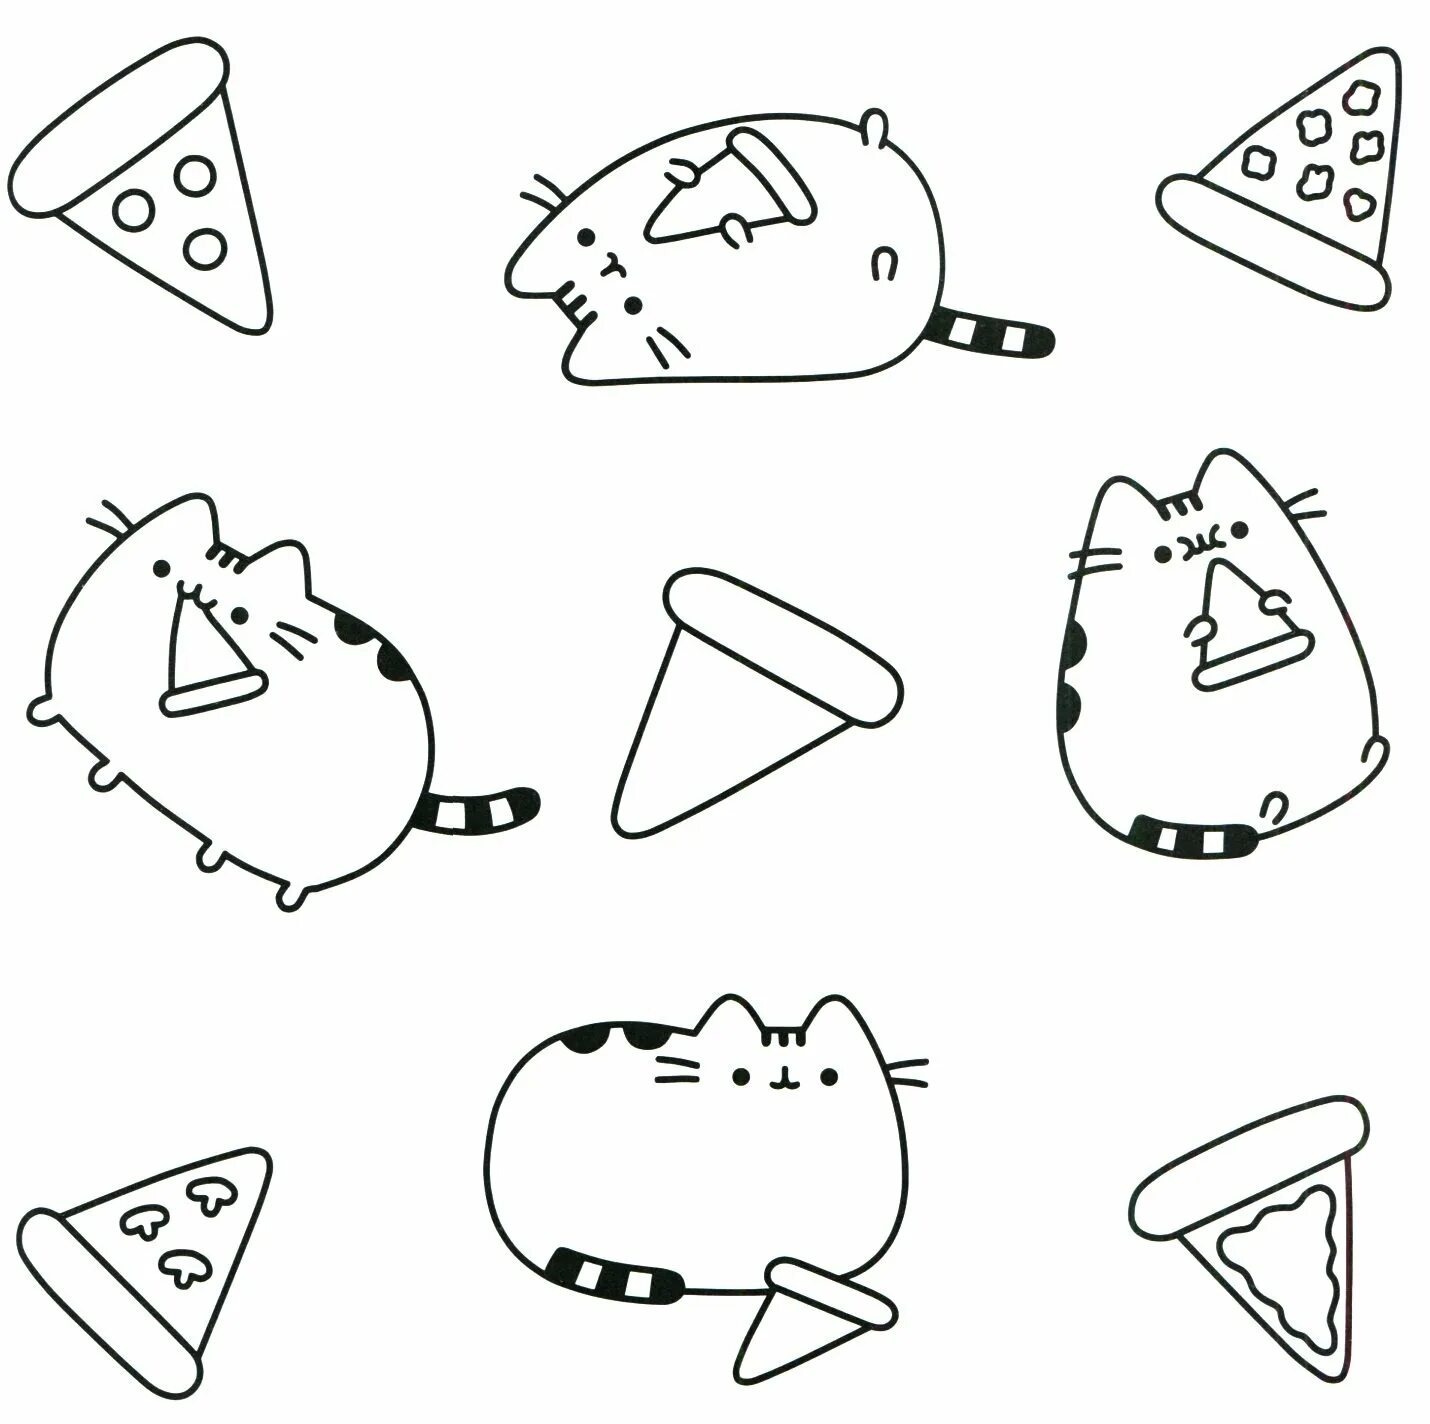 Attractive pusheen sticker coloring page